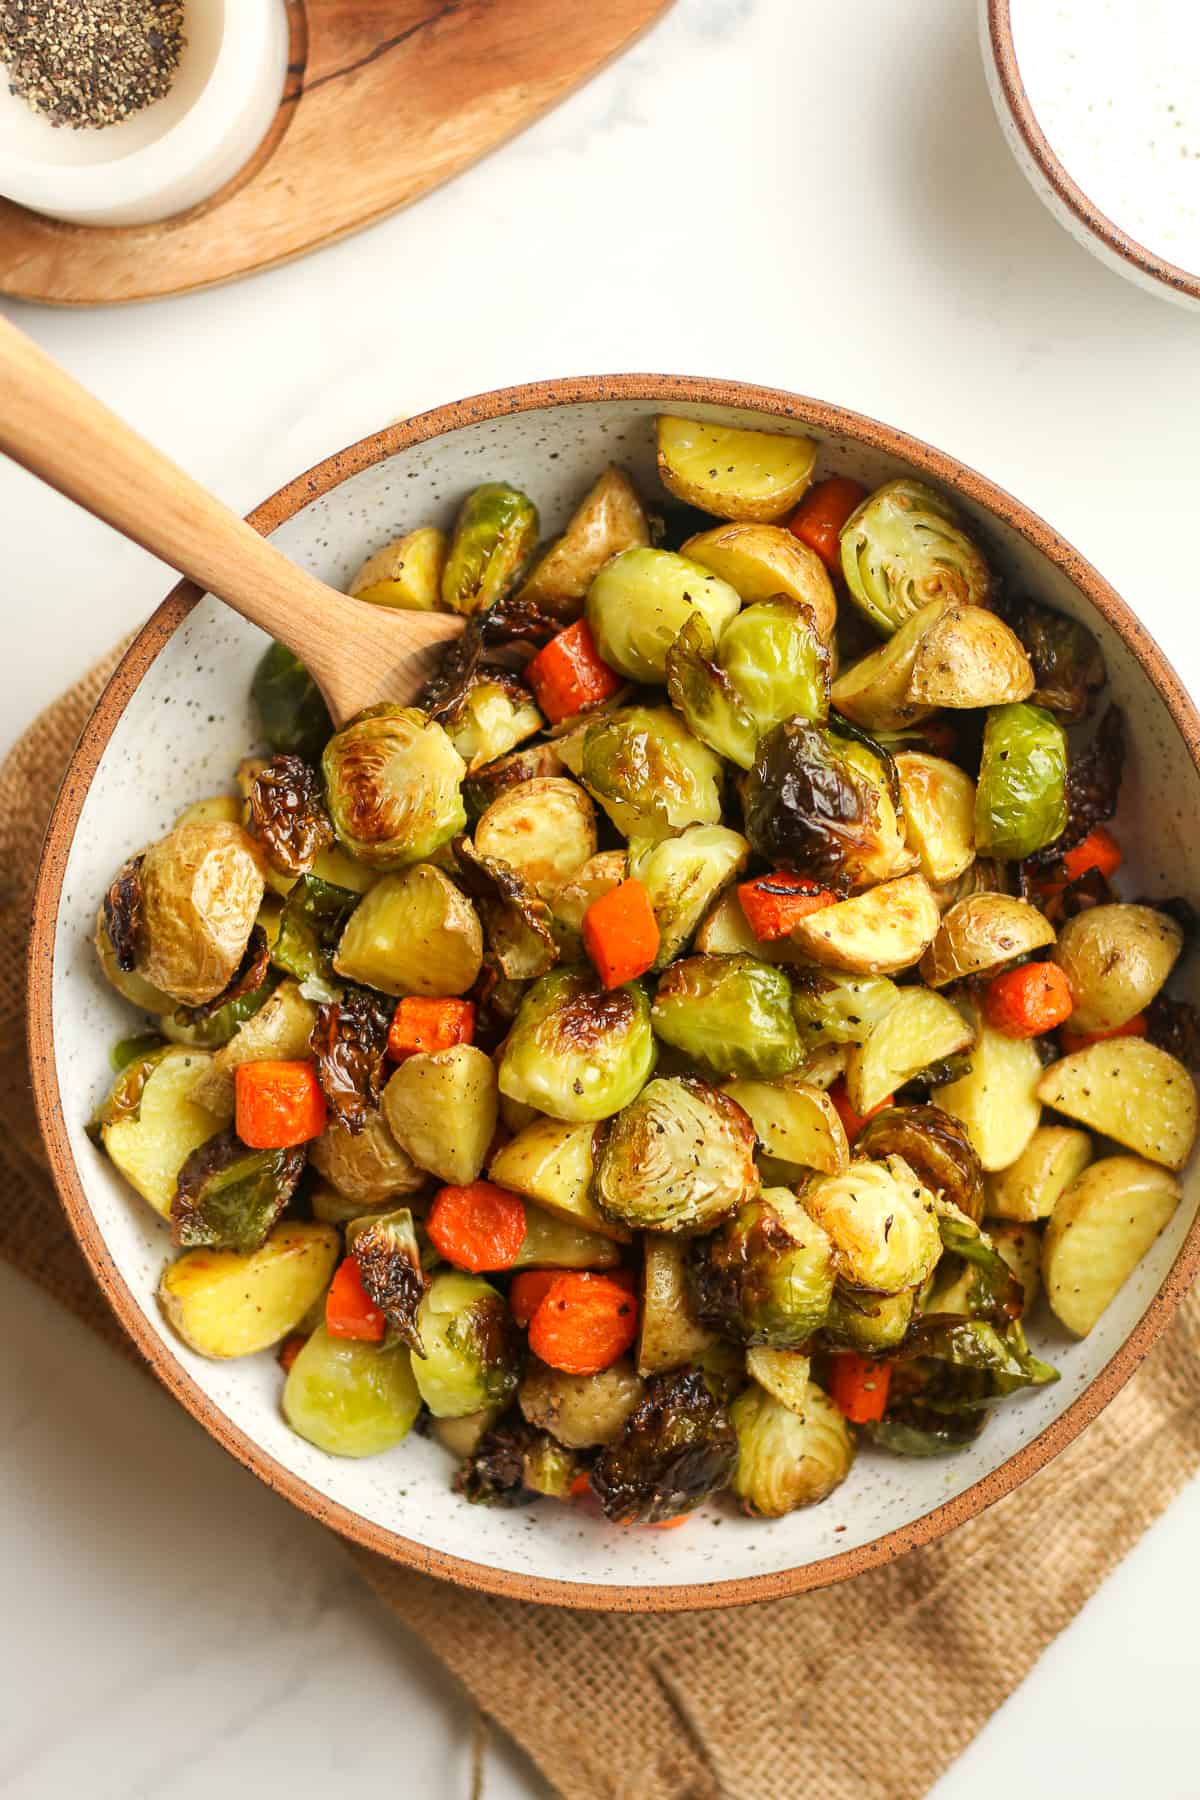 Overhead shot of a bowl of roasted potatoes, carrots, and Brussels sprouts.